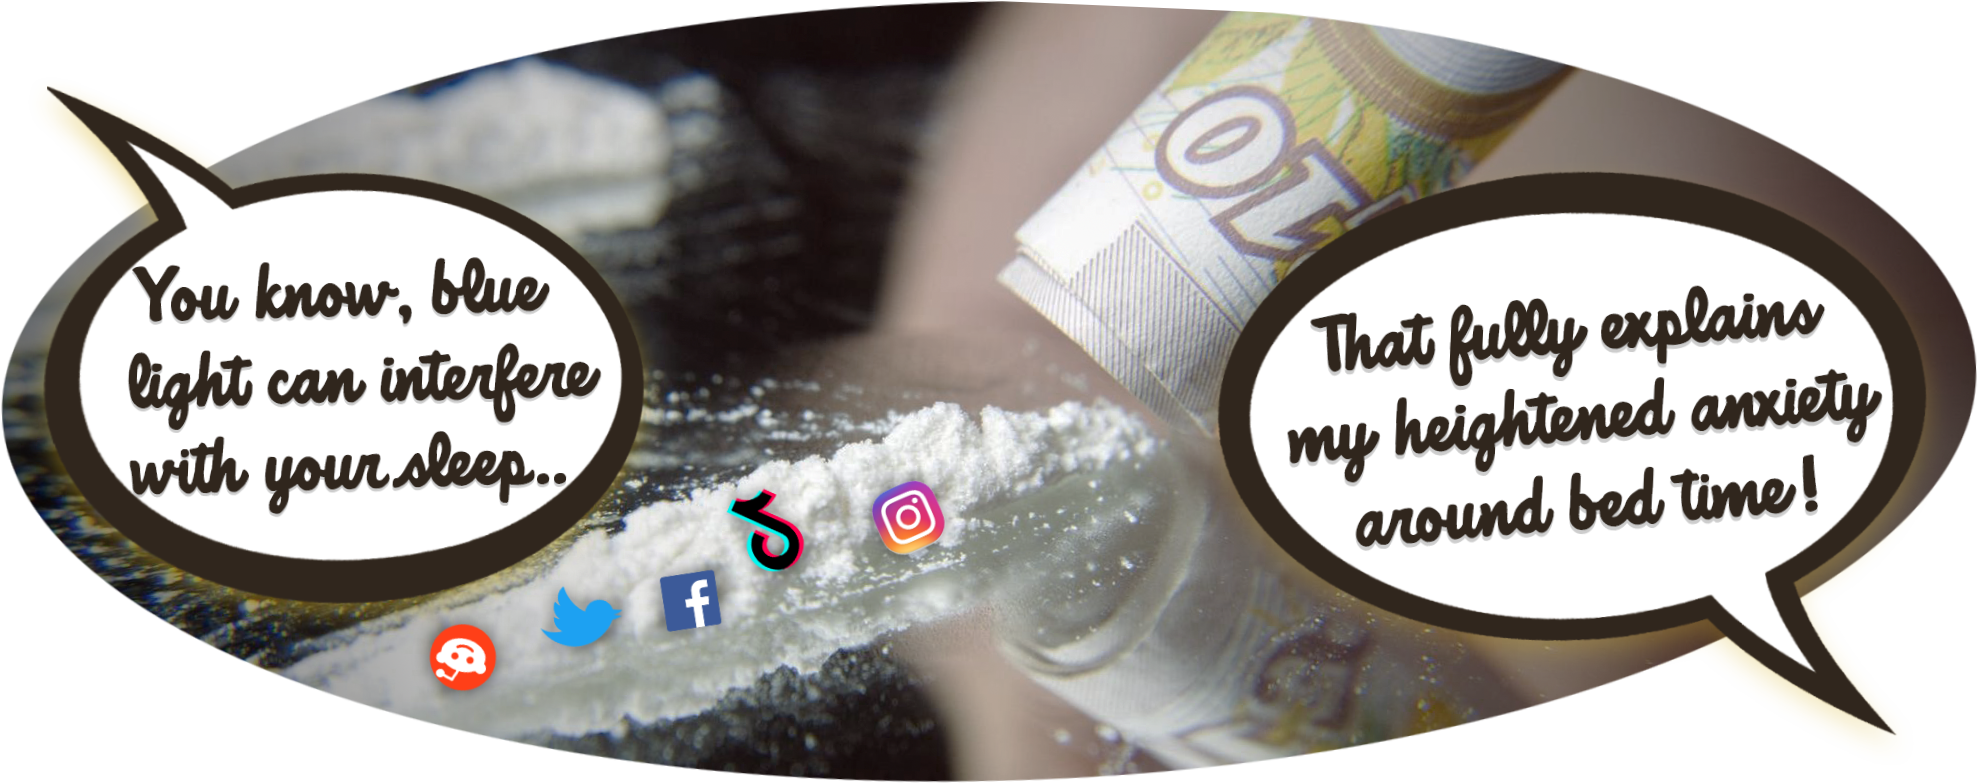 someone snorting social media icons like it was cocaine